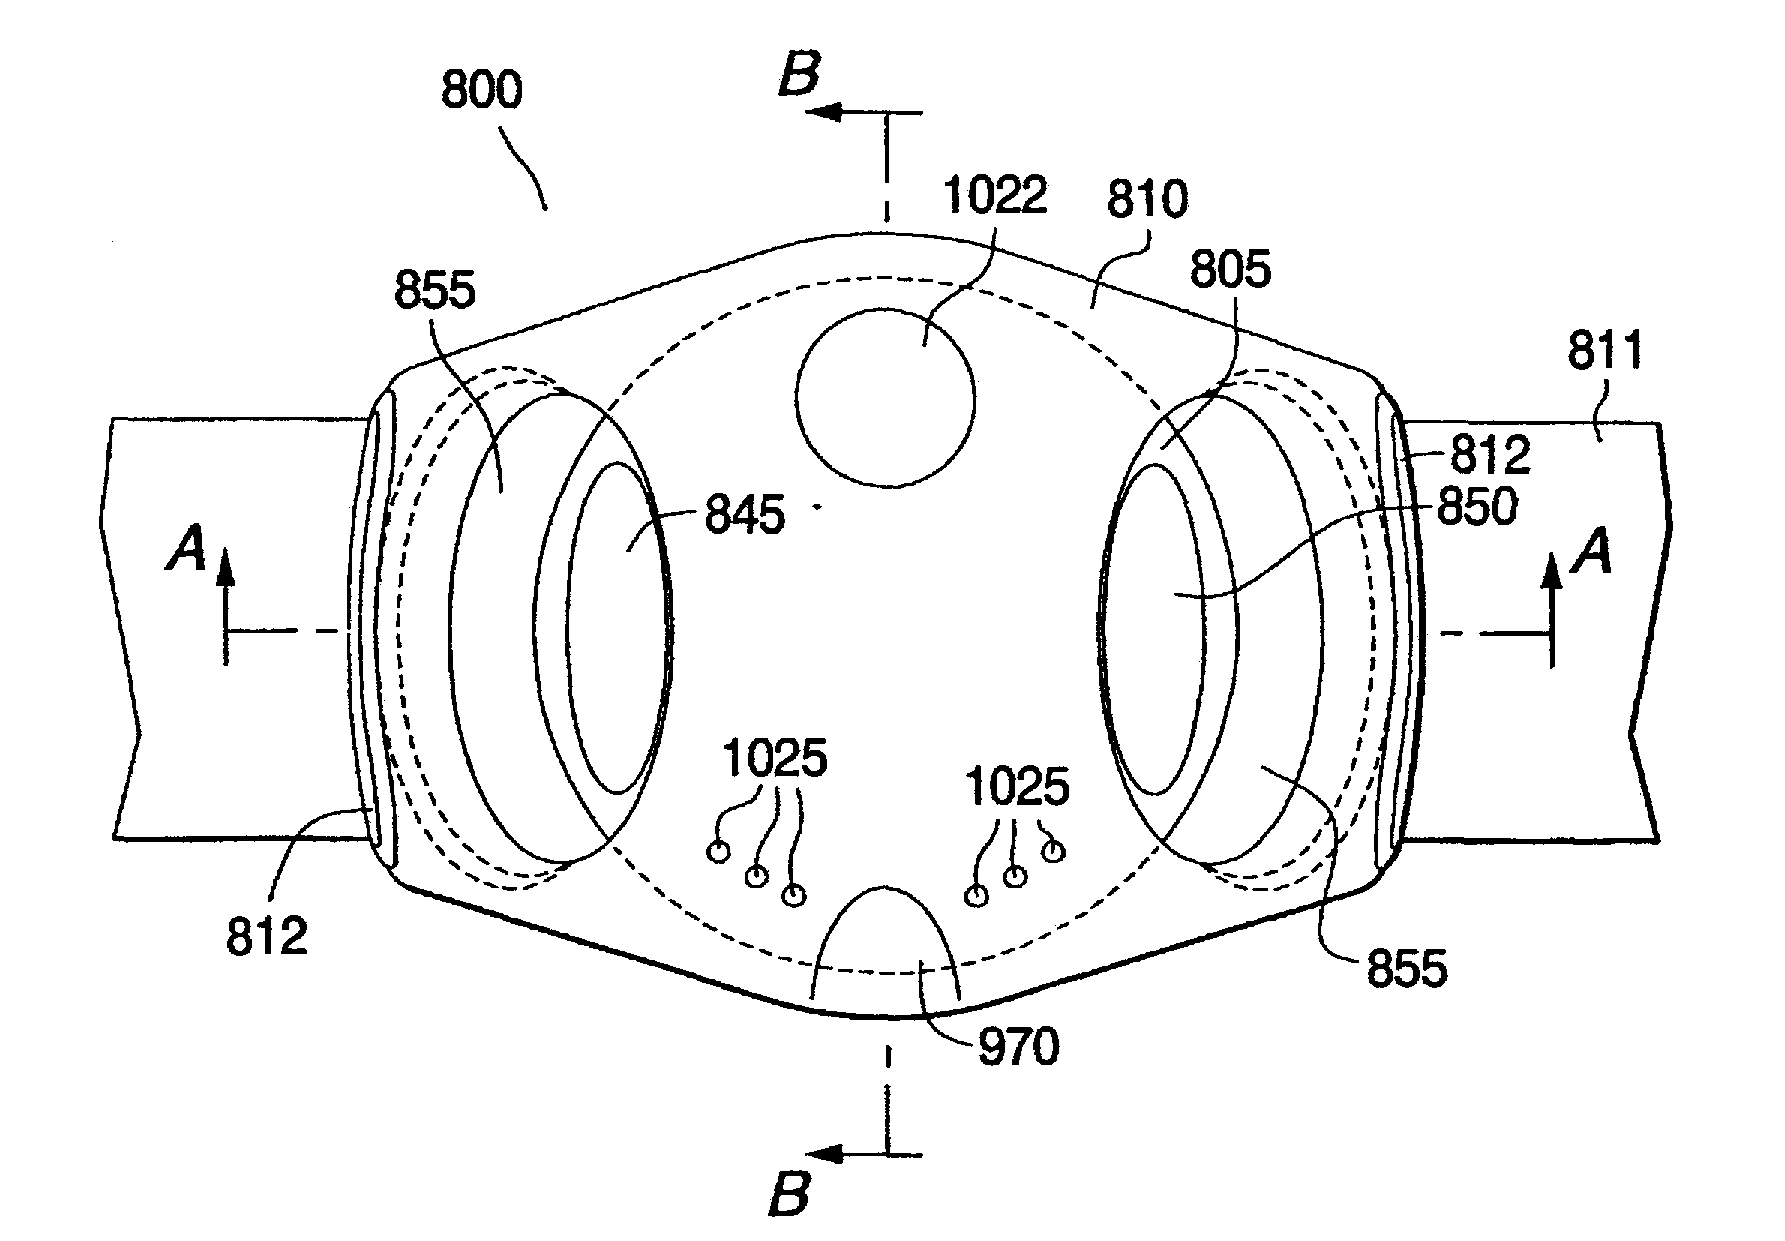 Apparatus for detecting human physiological and contextual information